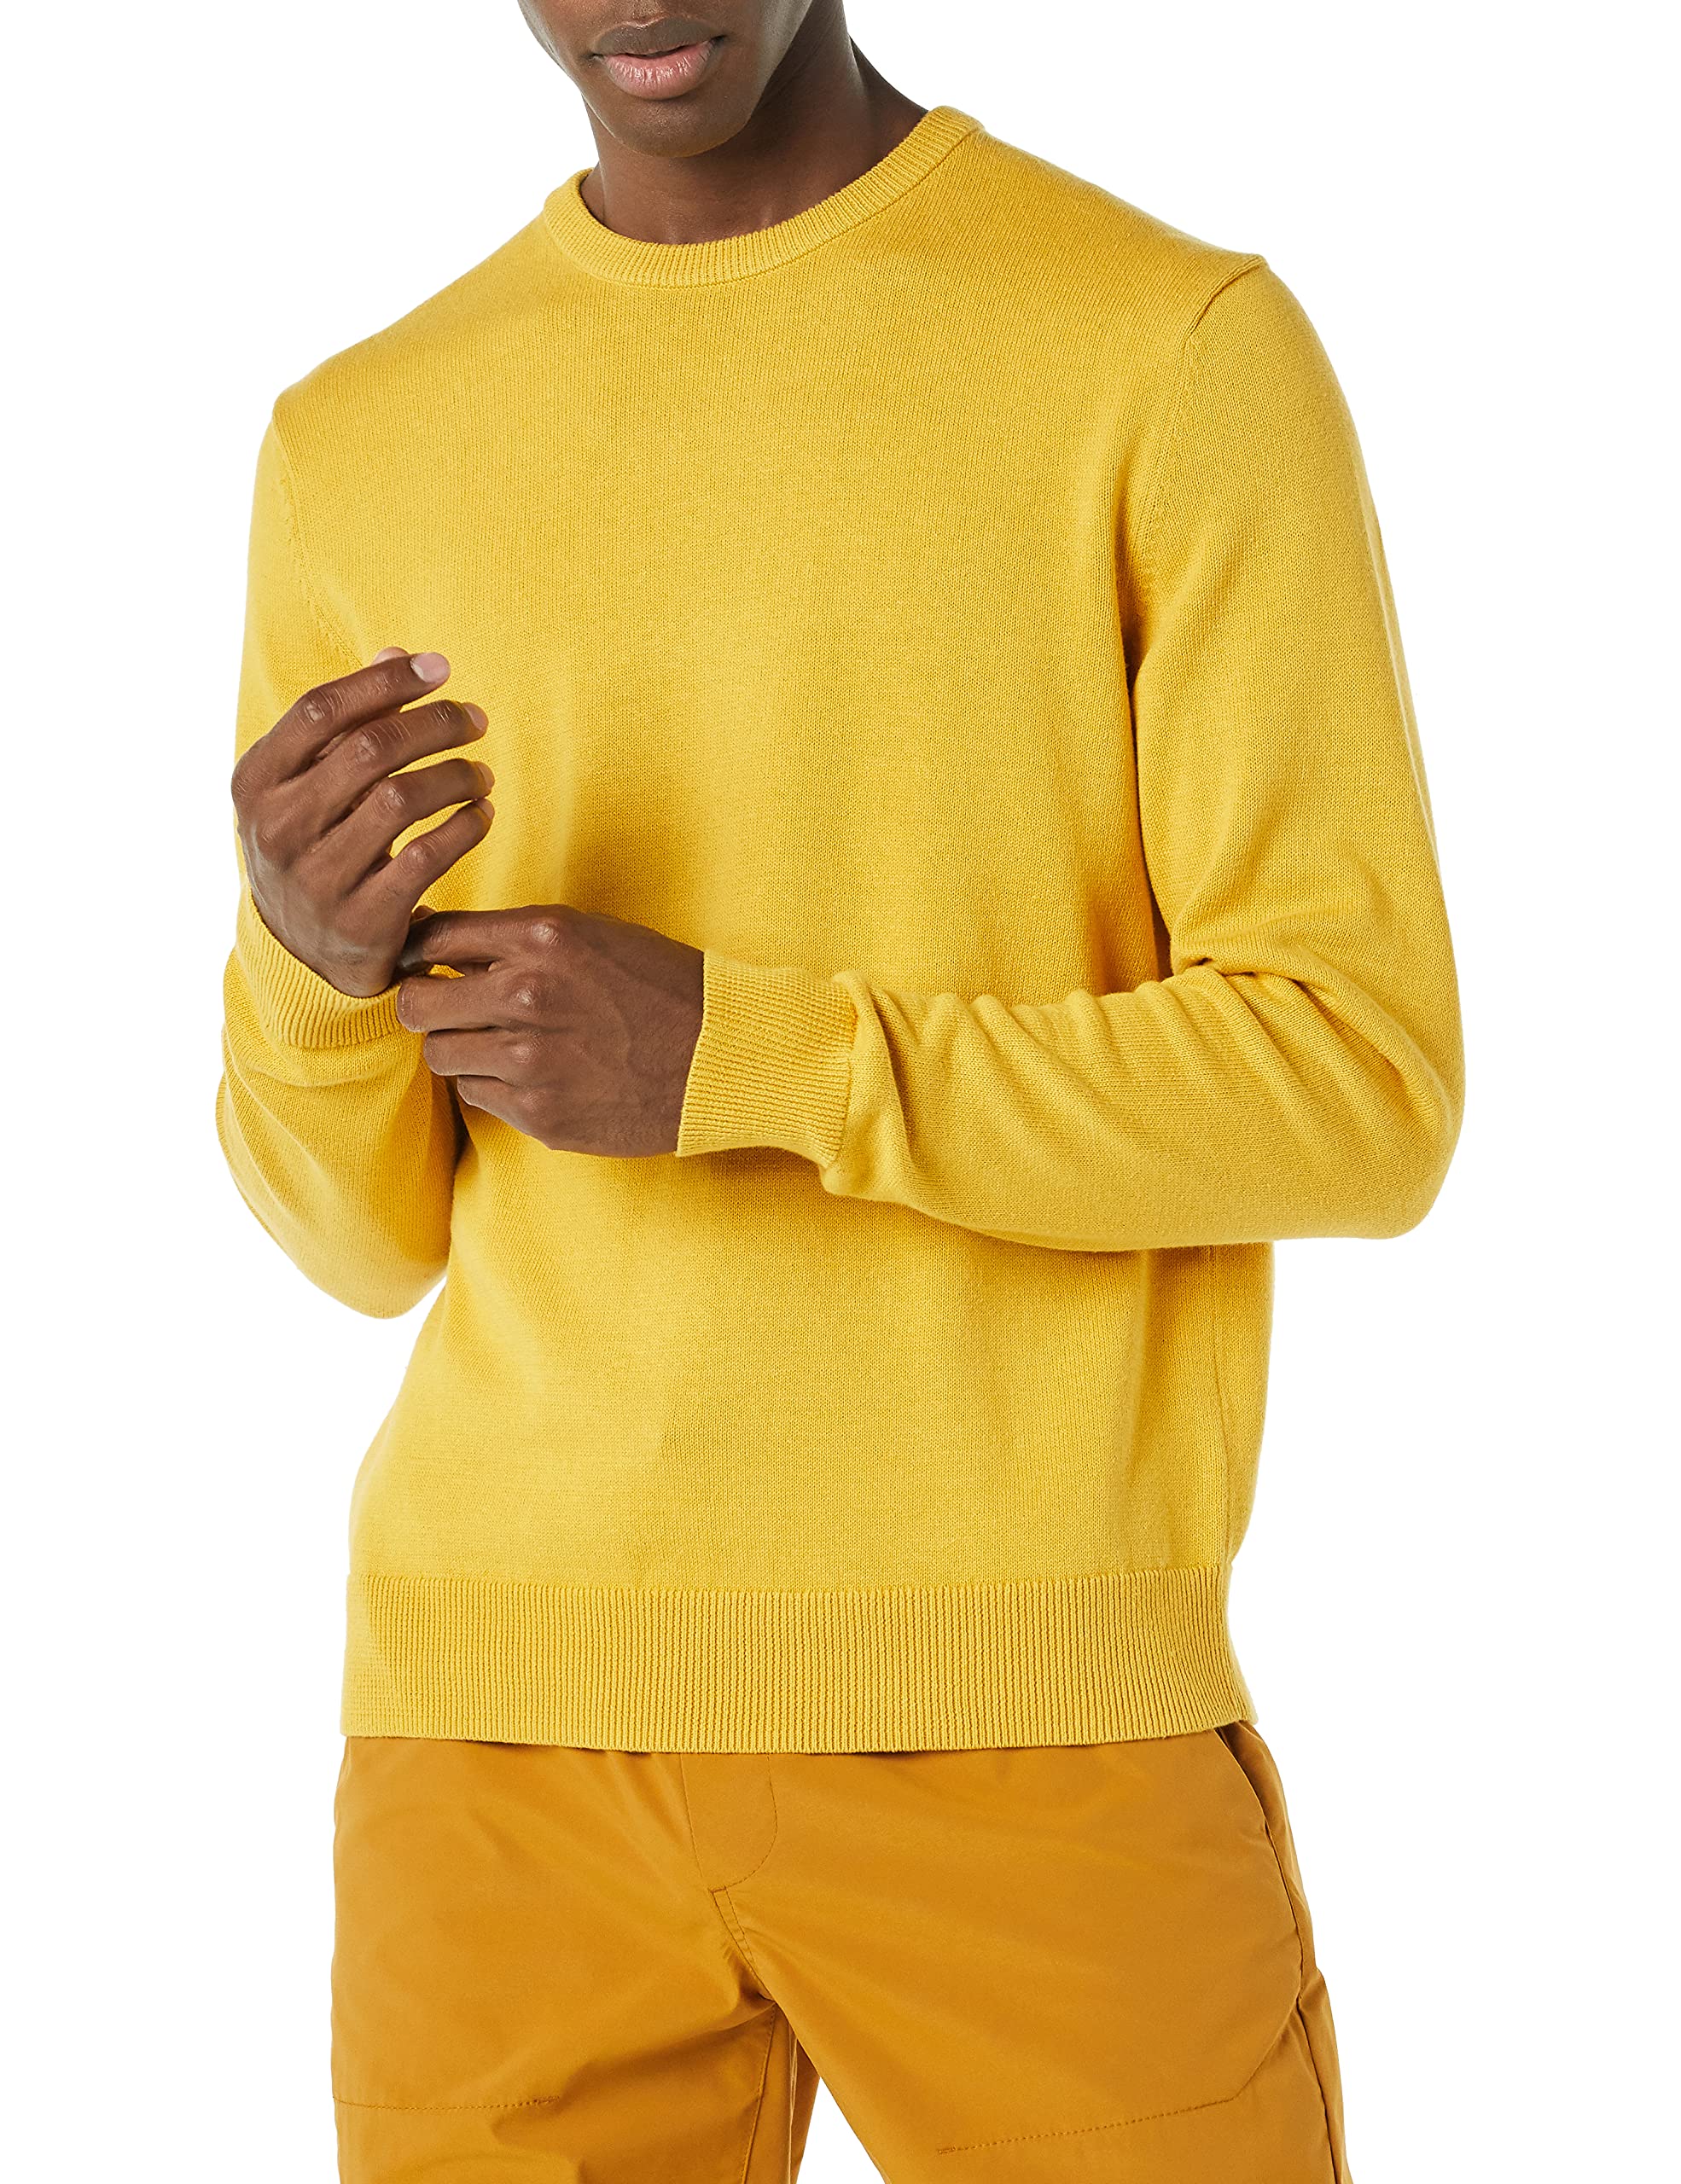 Amazon Essentials Men's Crewneck Sweater (Available in Big & Tall)